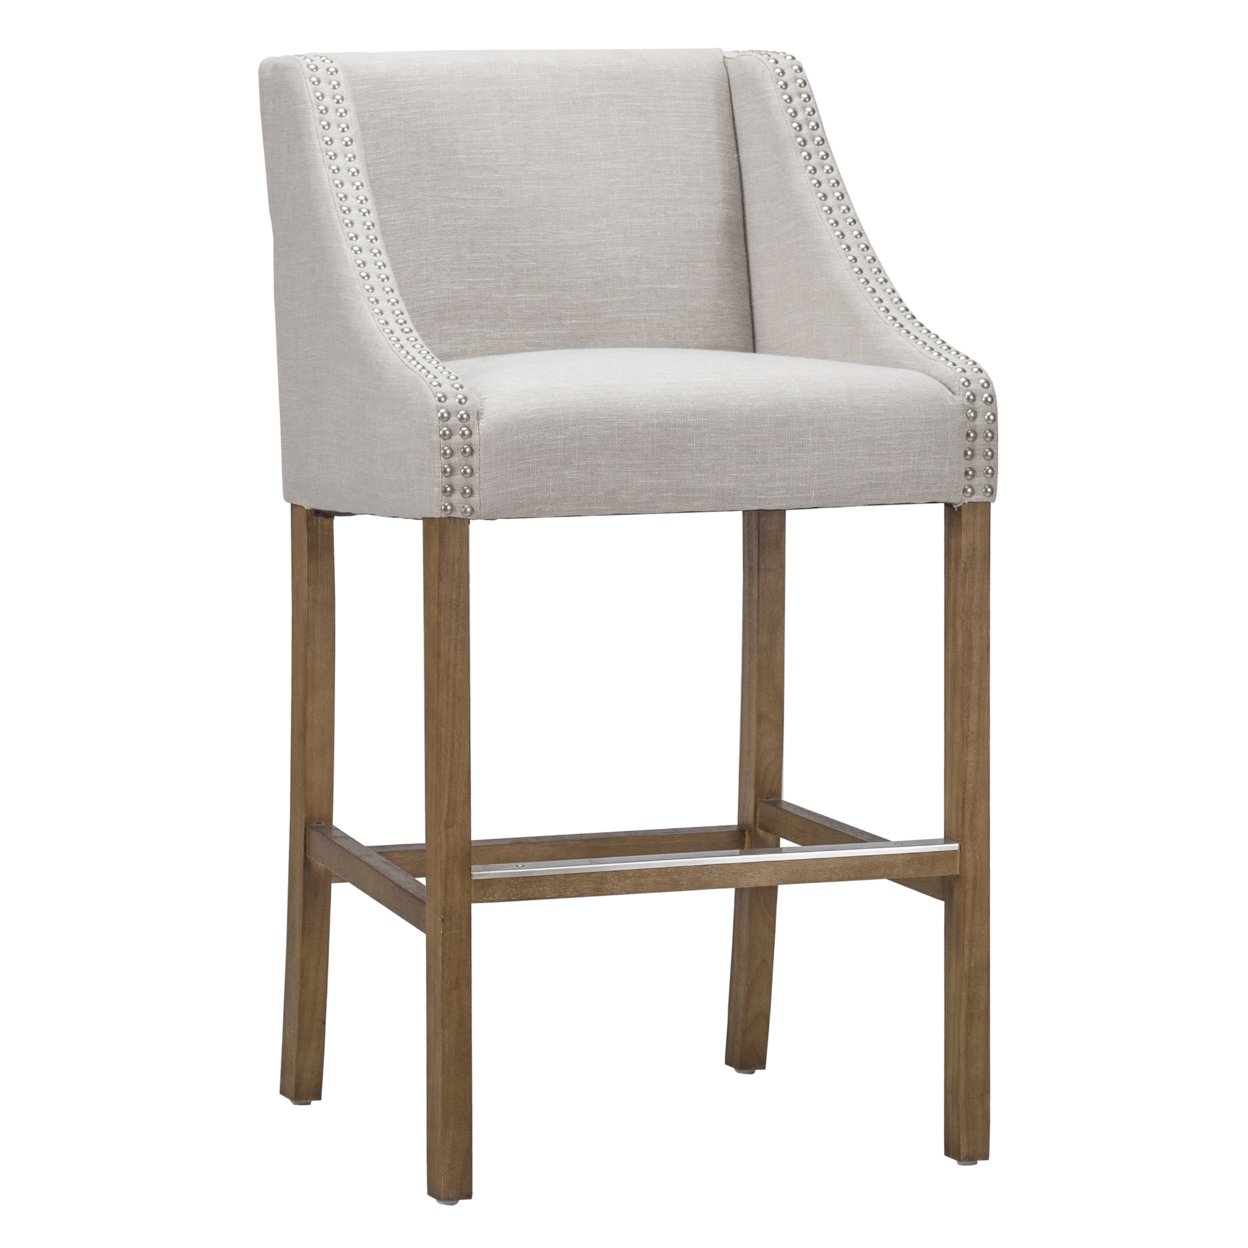 Wood And Fabric Counter Height Stool With Swooping Arms And Nail Head Trim, Beige And Brown- Saltoro Sherpi